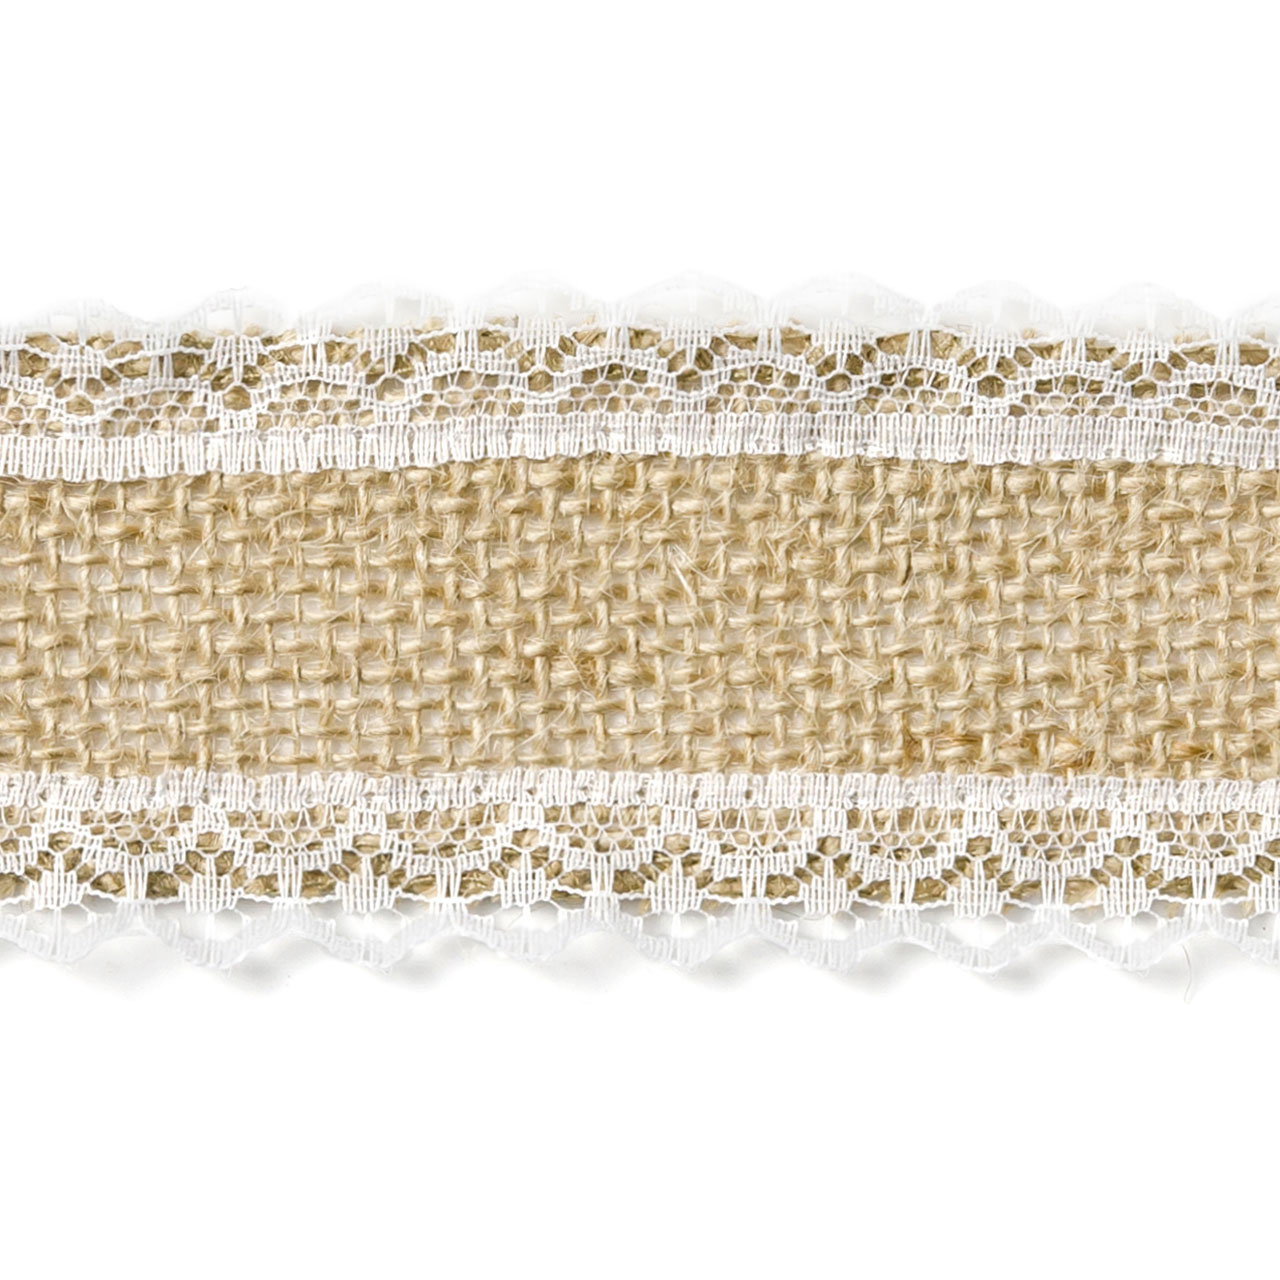 Jute Tape with Lace Edging